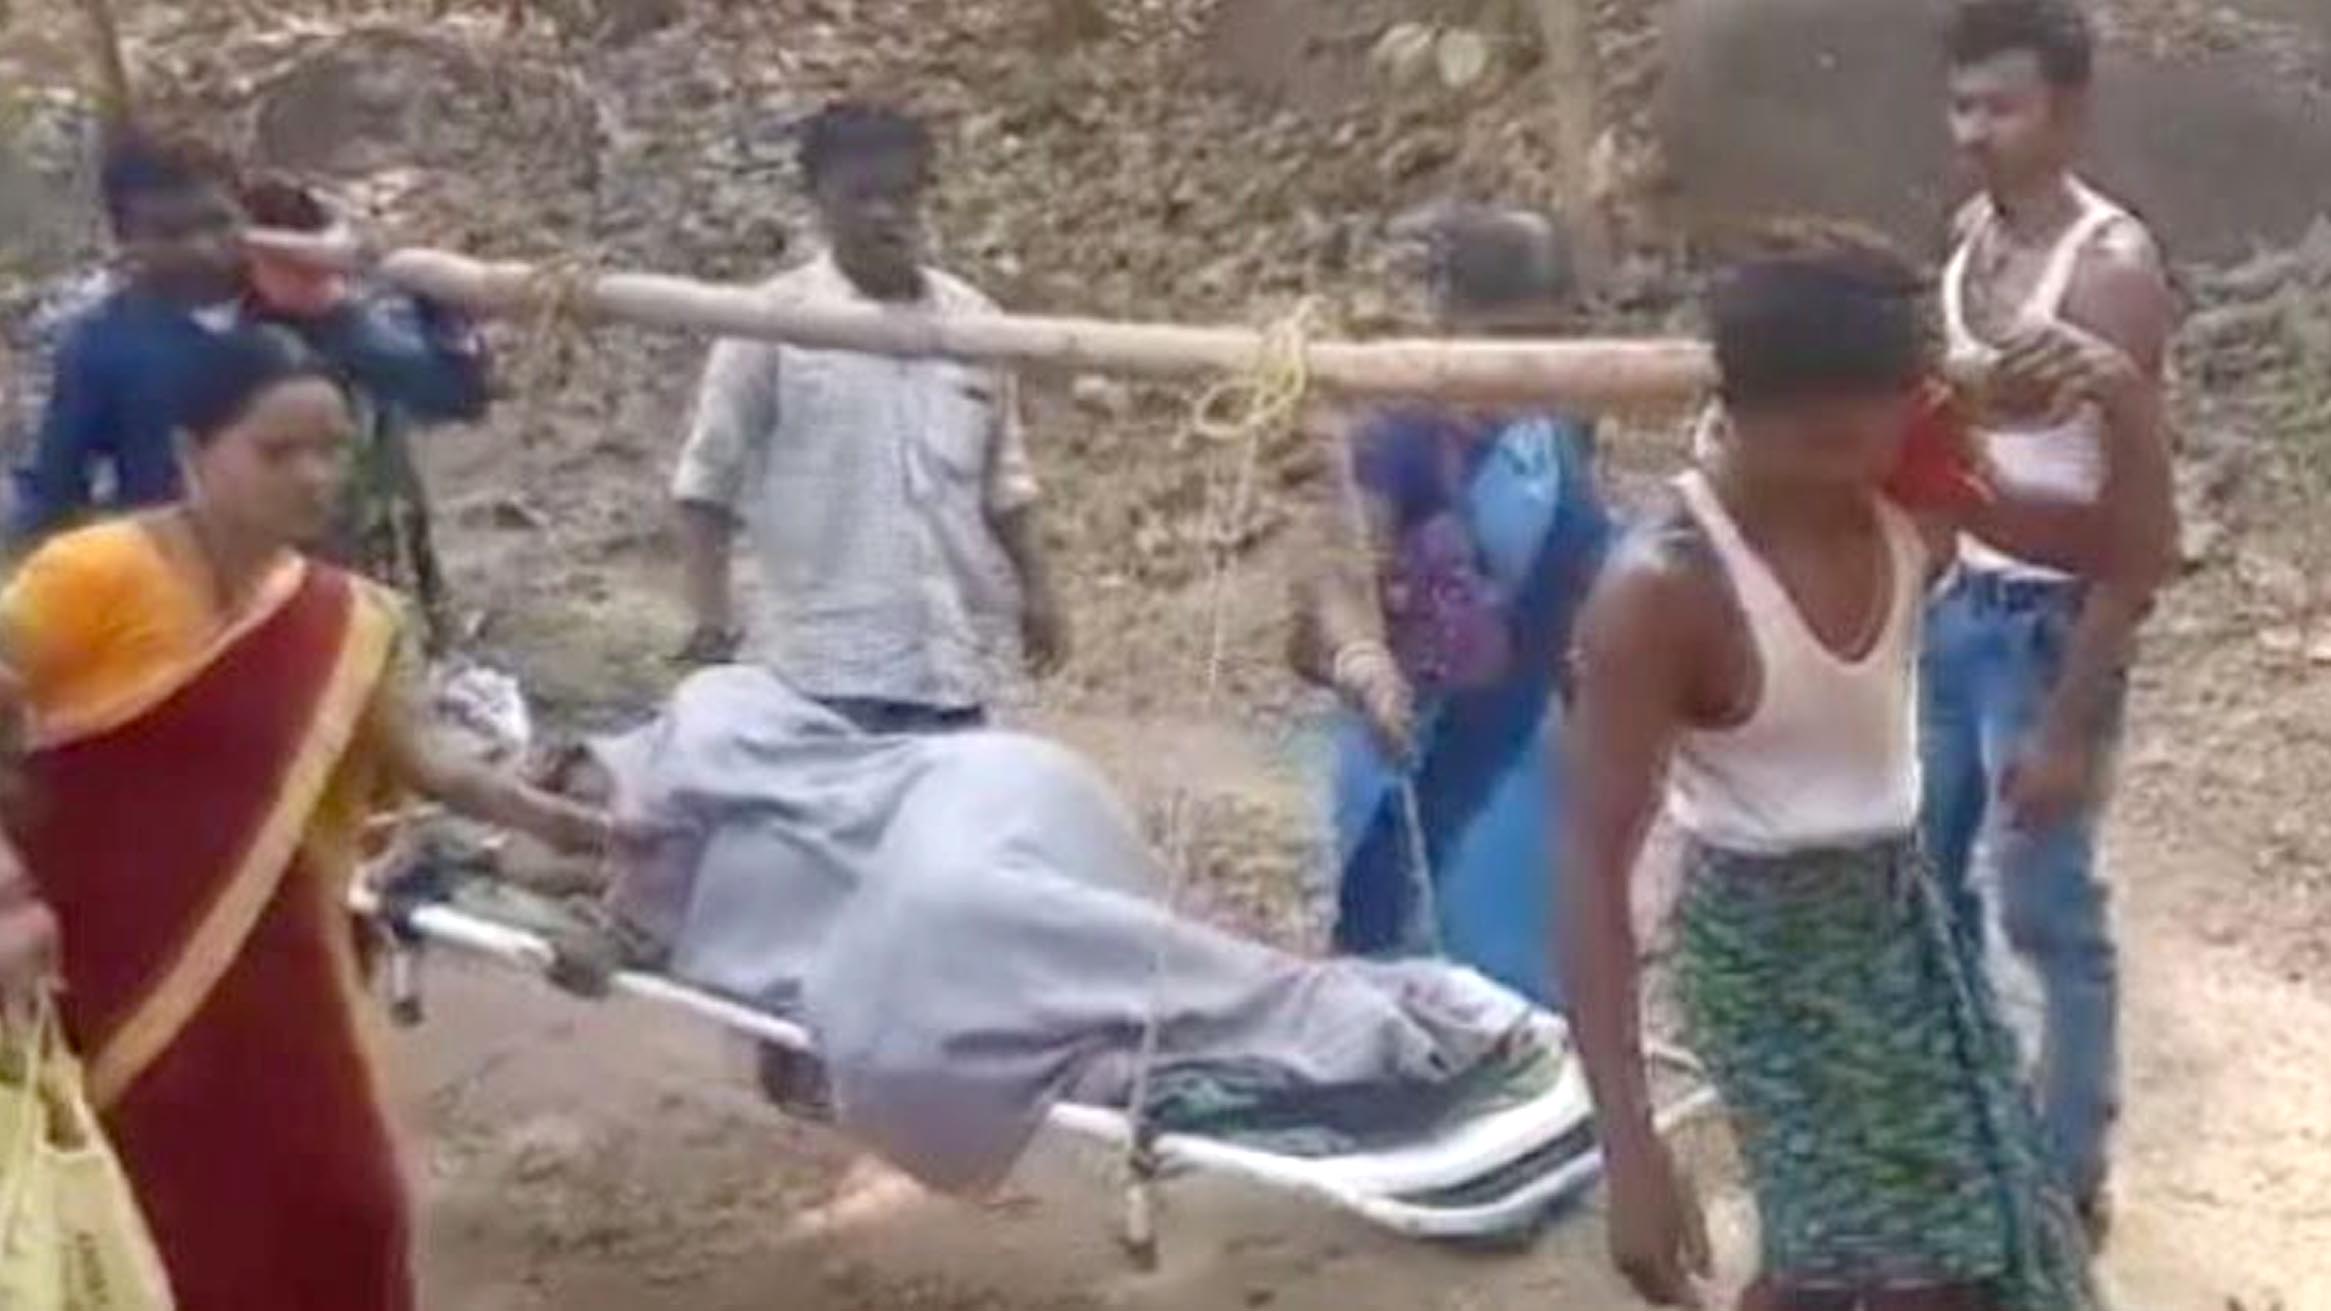 Pregnant woman carried on stretcher in Nuapada